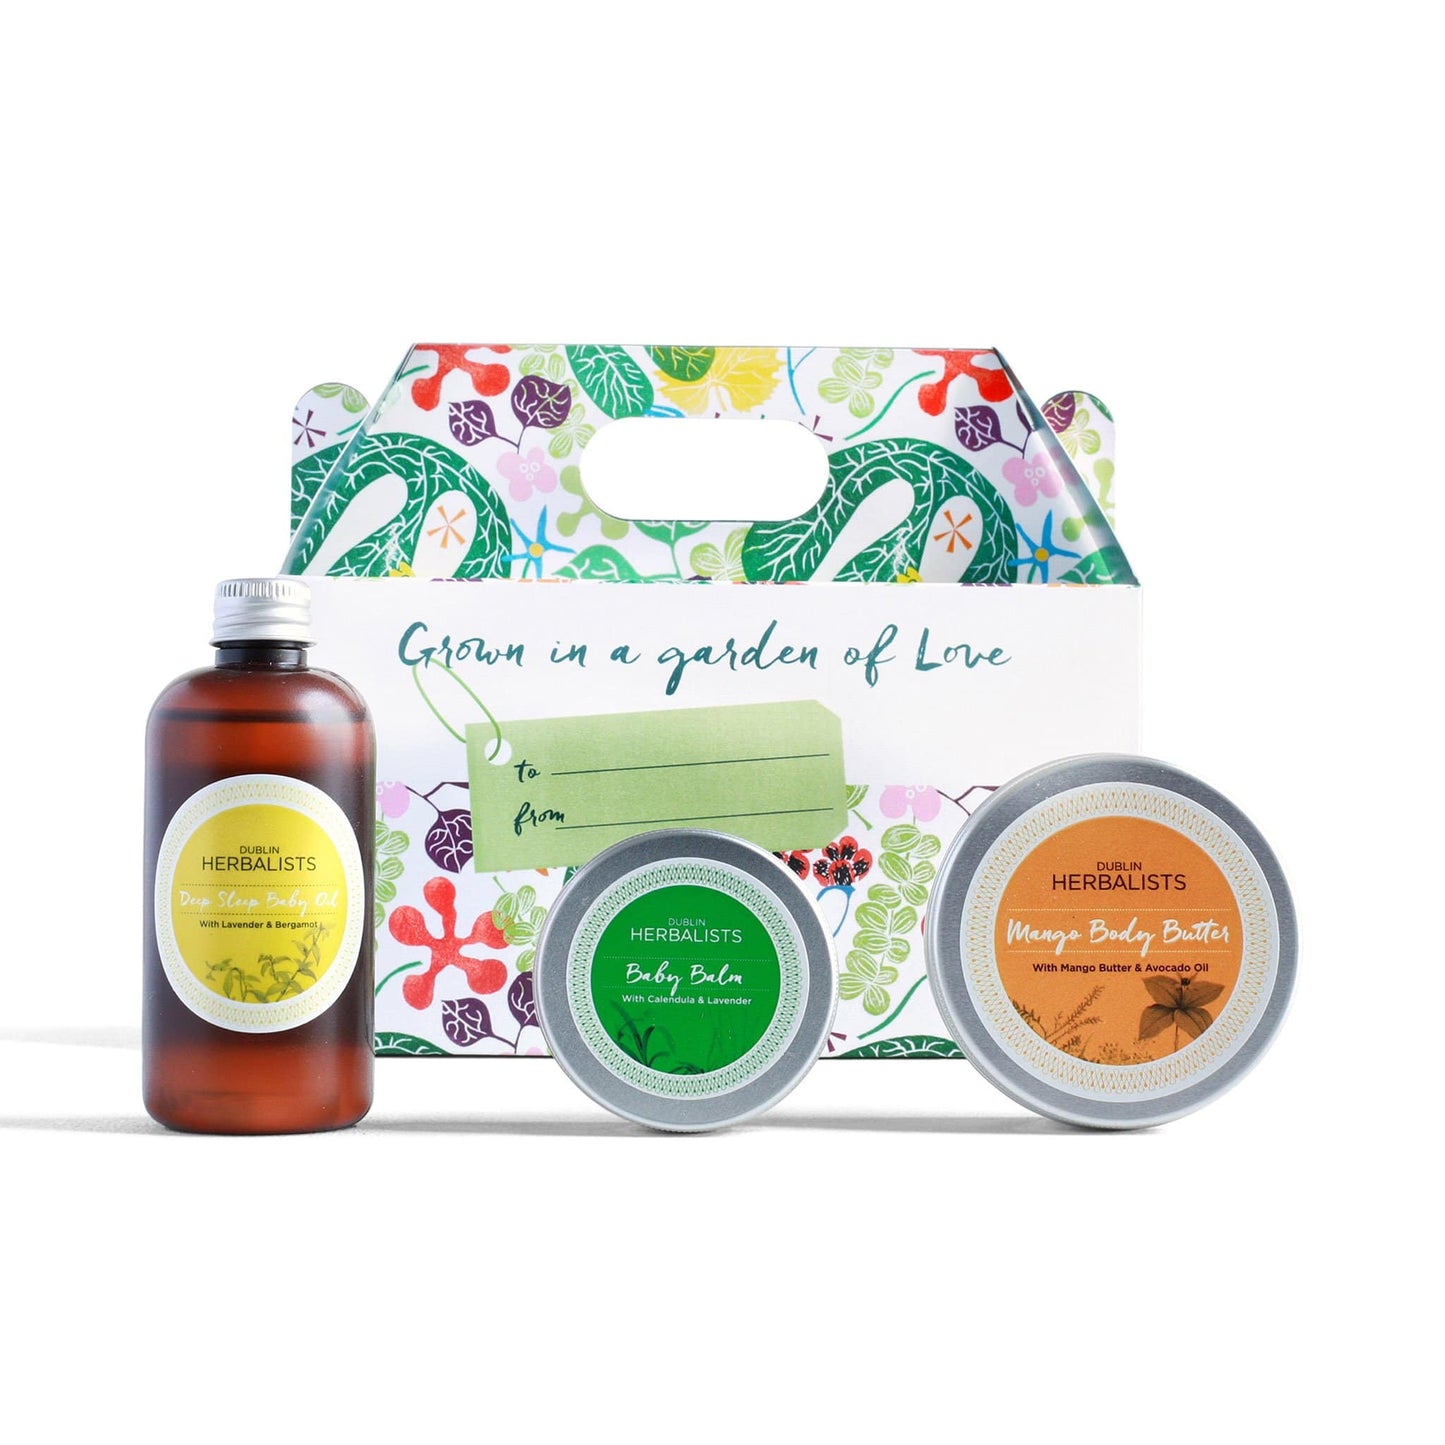 Load image into Gallery viewer, Dublin Herbalists Gift Box New Baby Collection Gift Set - Dublin Herbalists
